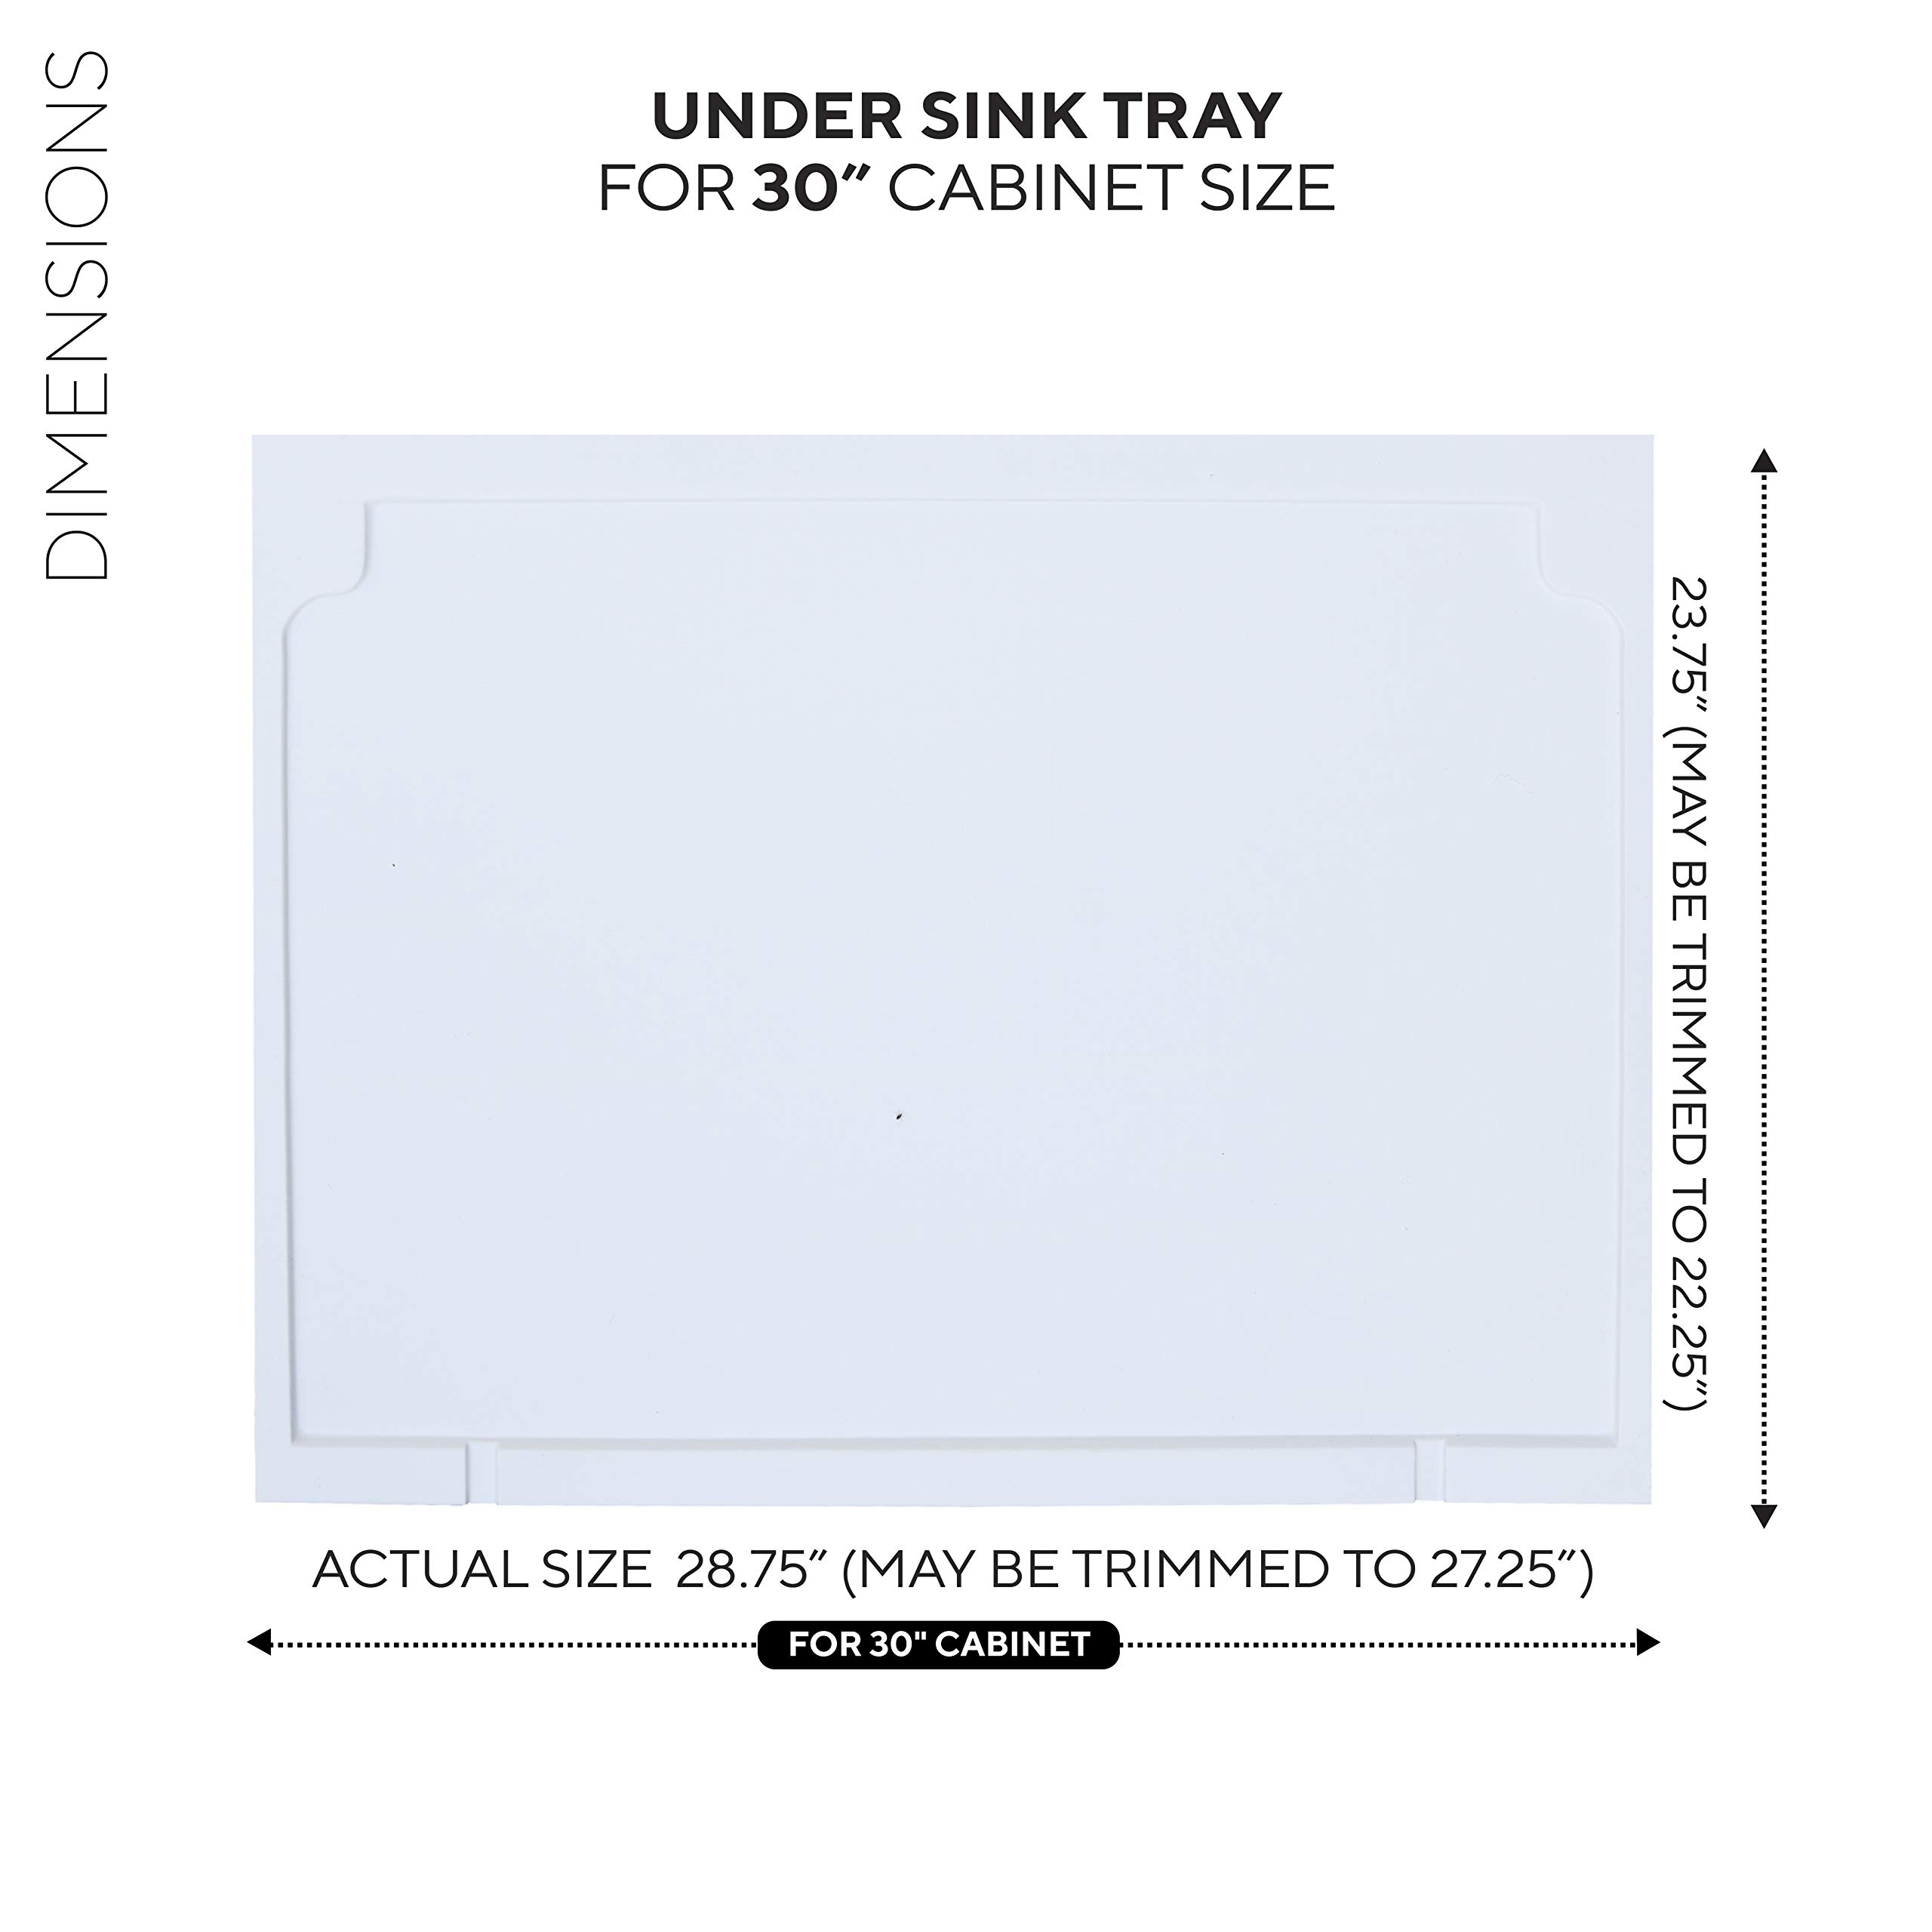 Vance Trimmable Under Sink Tray for 30 in. Base Cabinet | Protects Cabinets from Leaks and Spills | Adjustable Spill Guard for Kitchen and Bathroom Sinks